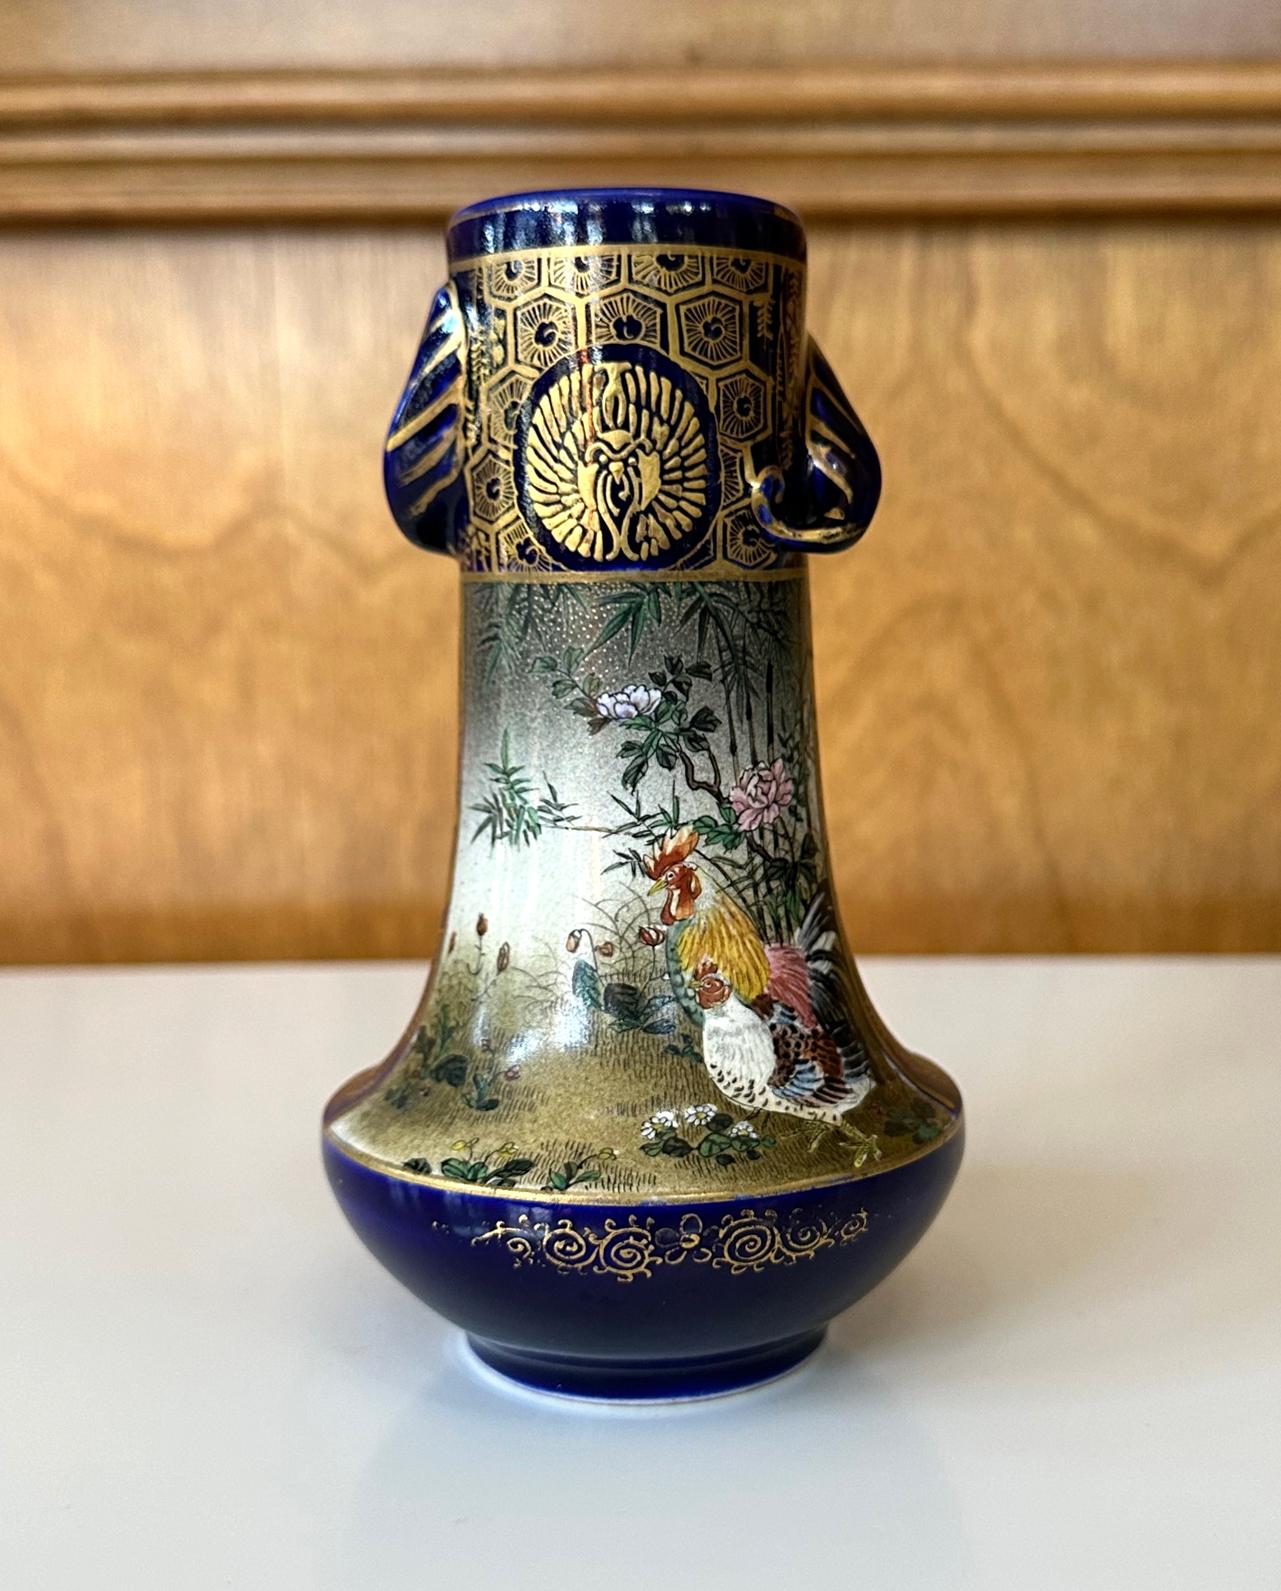 A miniature Japanese ceramic vase from the end of Meiji period circa 1880s- 1910s by Kinkozan (1645-1927). One of the largest studio manufacturers of the export ceramics at the time based in Kyoto. Decorated the iconic style of satsuma made by